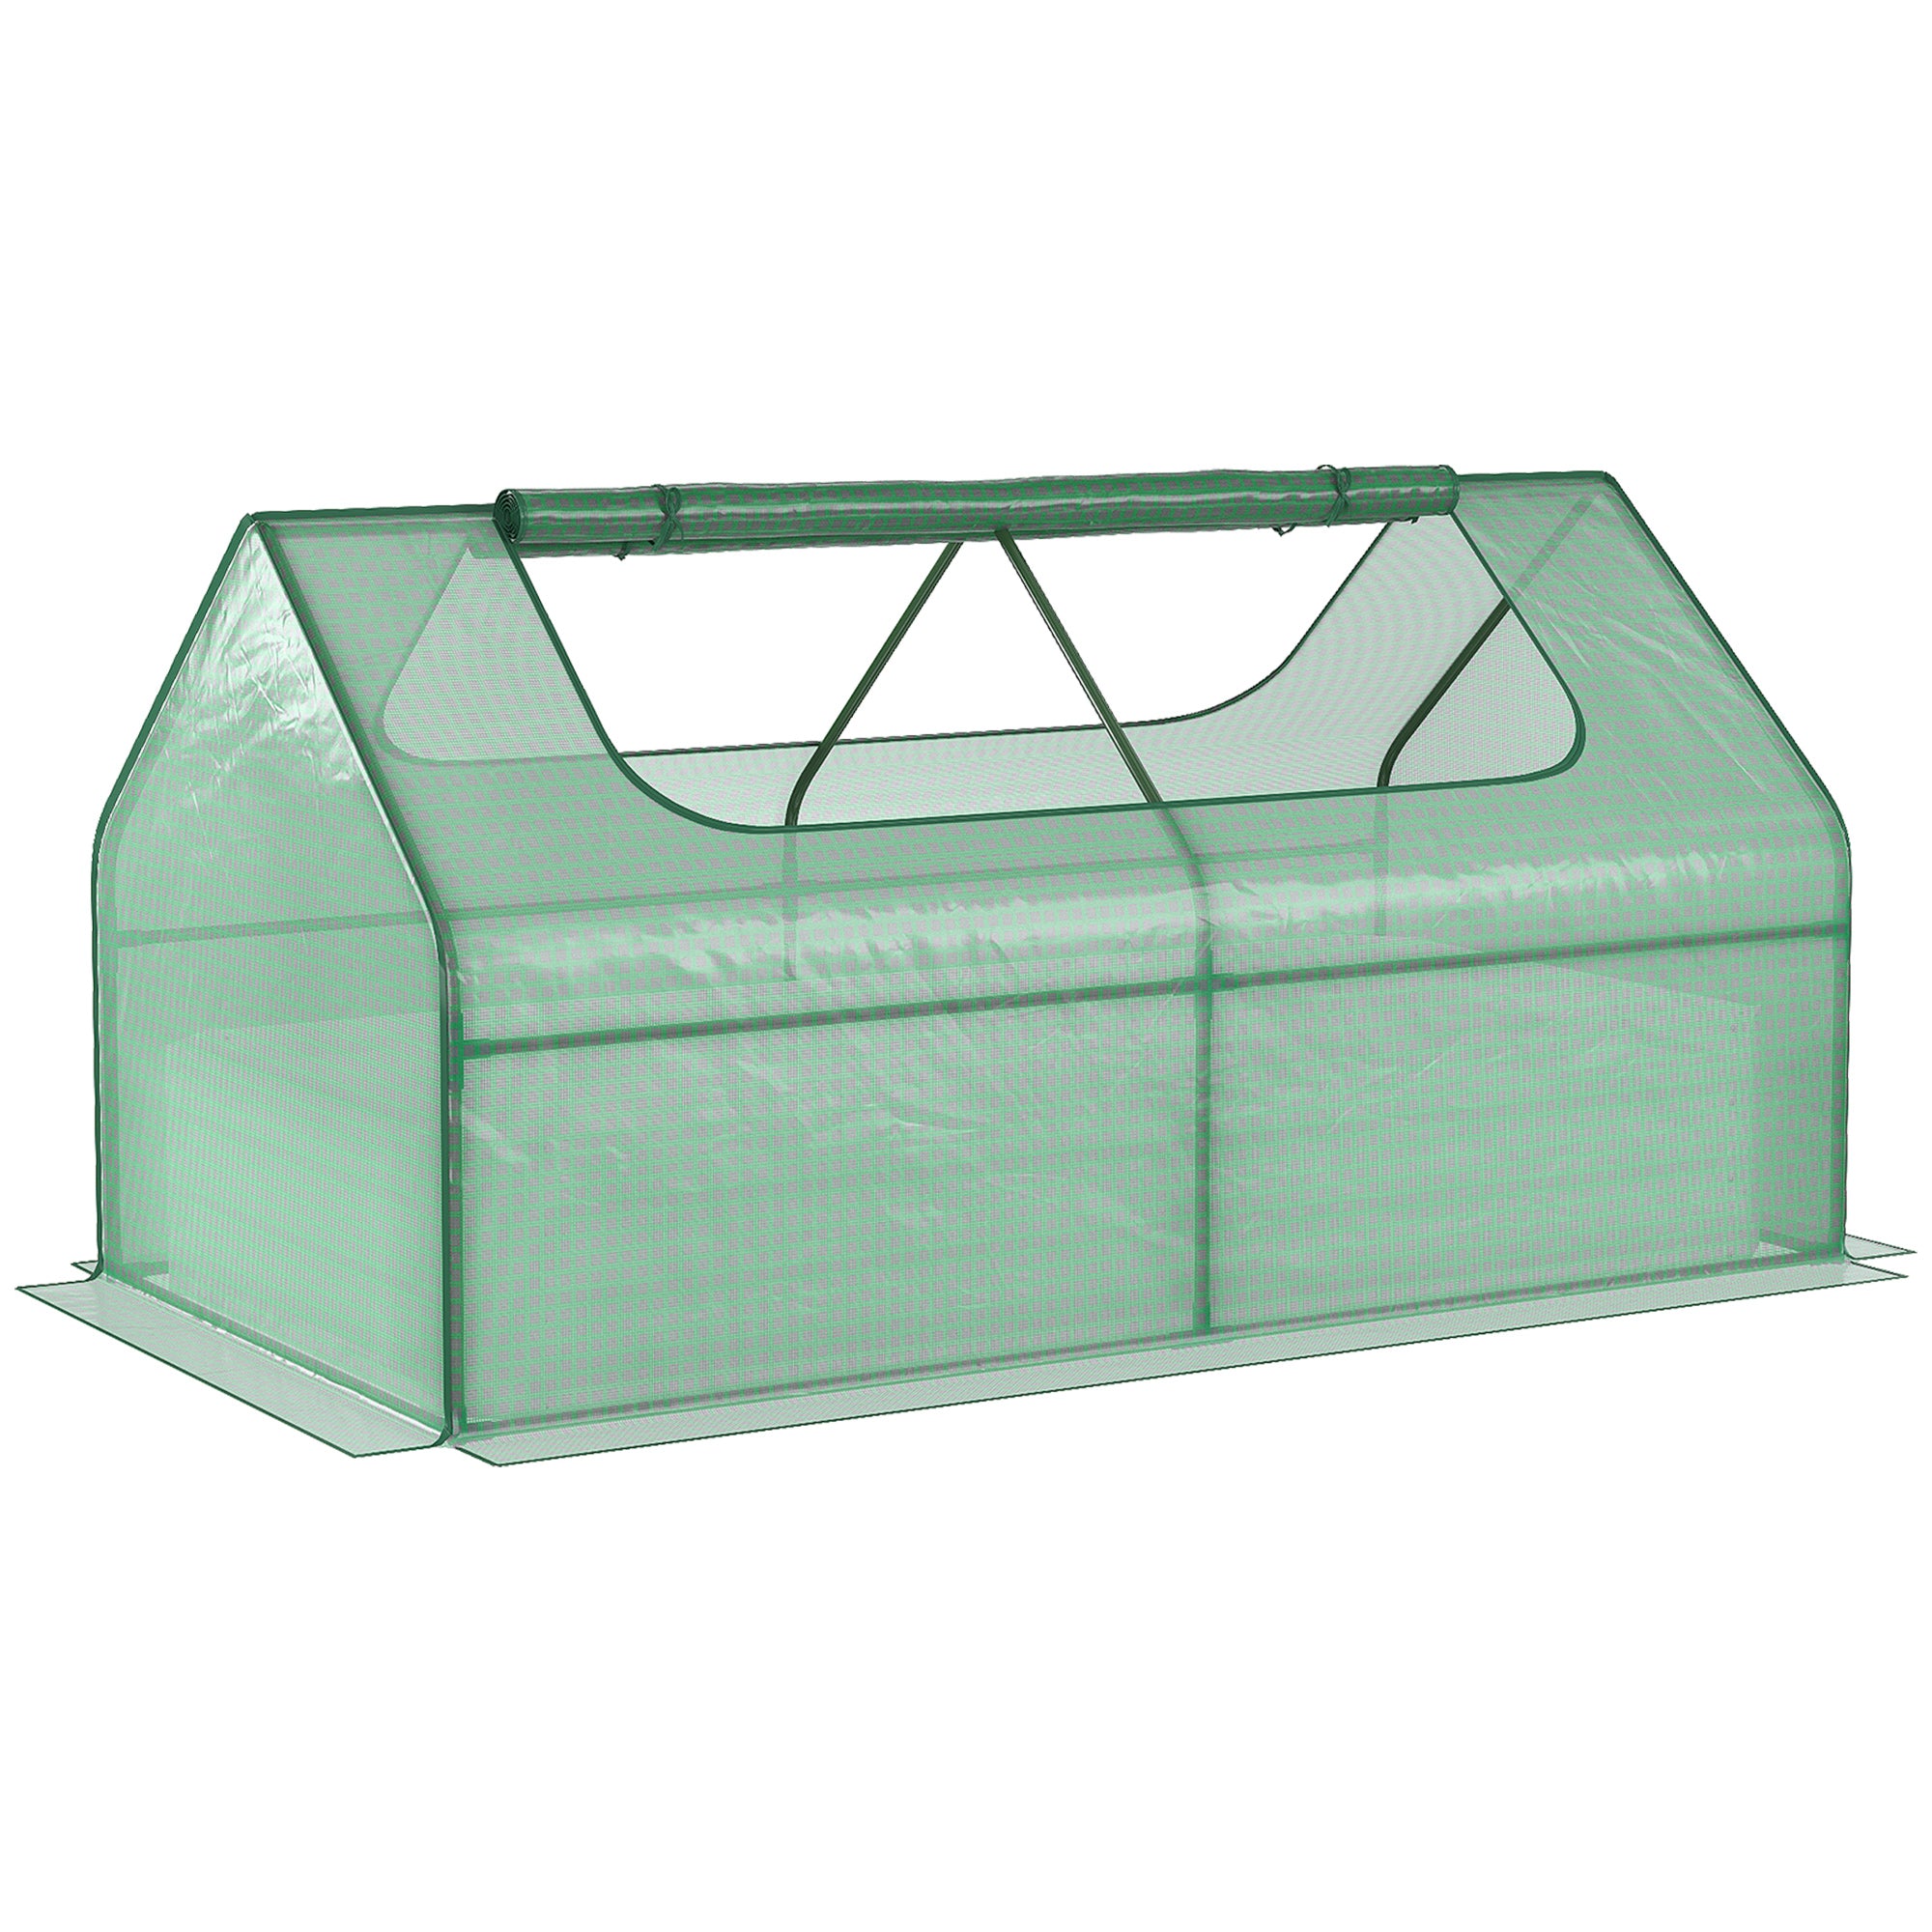 Outsunny Raised Garden Bed Planter Box with Greenhouse - Large Window - Green  | TJ Hughes Grey